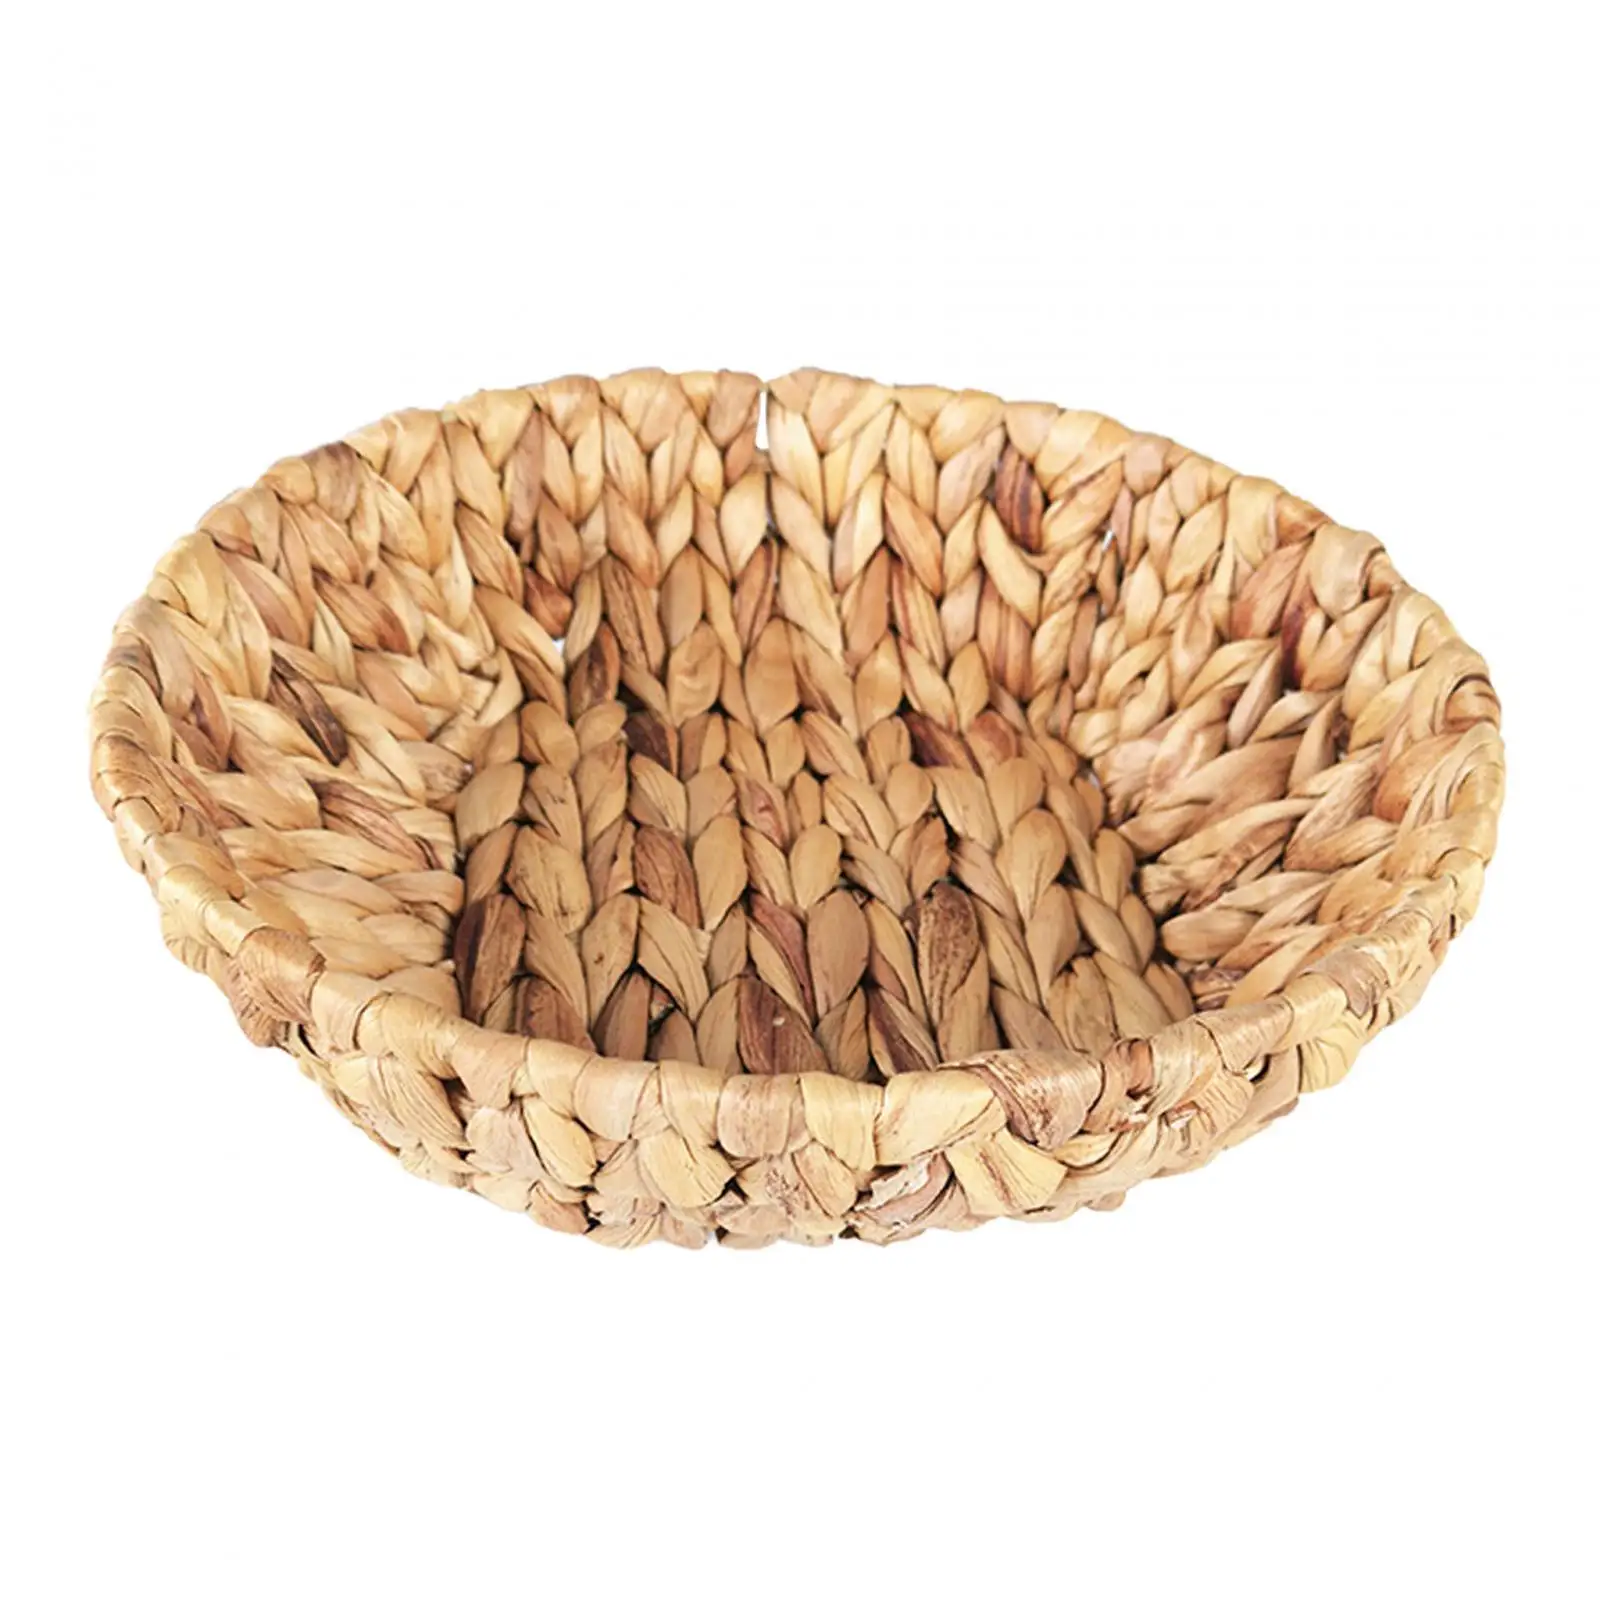 Round Grass Storage Bin, Water Hyacinth Storage Basket, Wicker Serving Tray for Arts and Crafts Coffee Table Tea Party